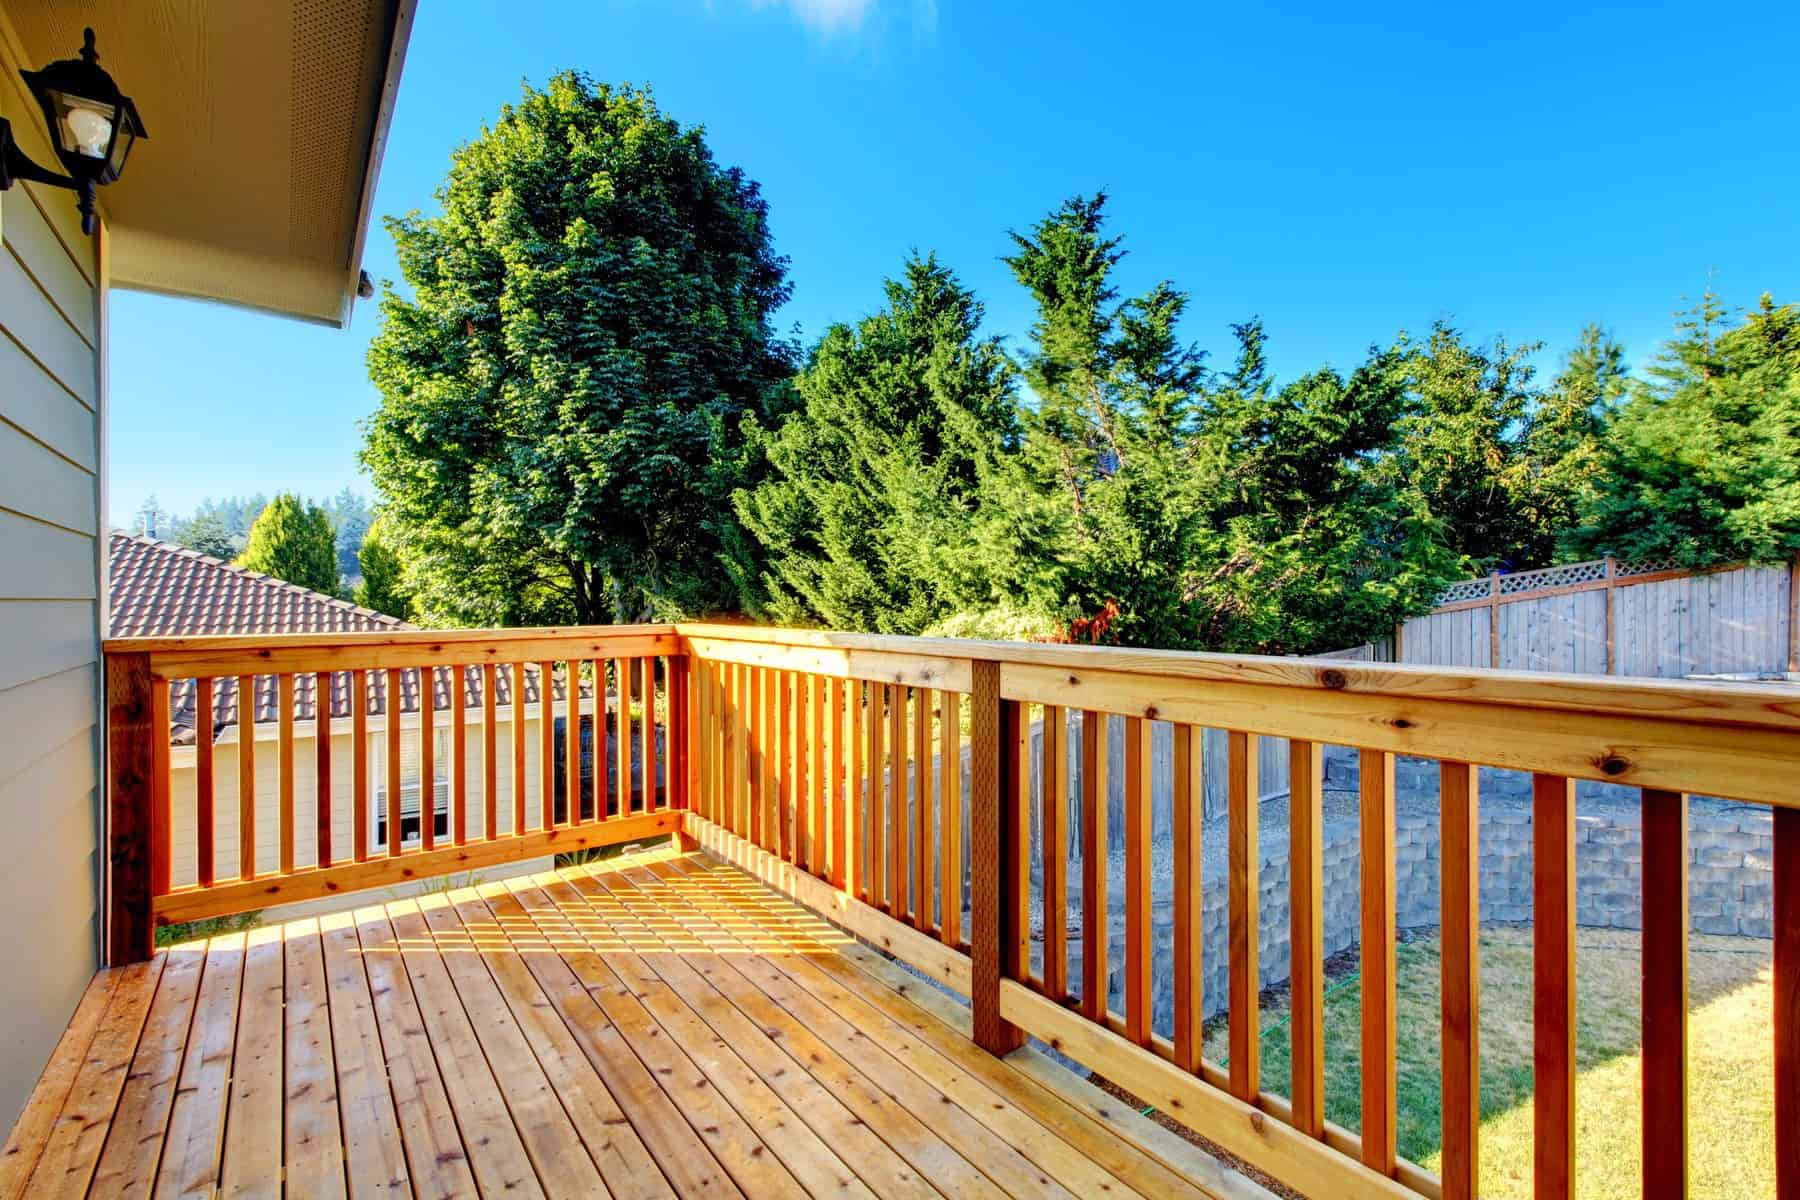 Reddish wood stained deck